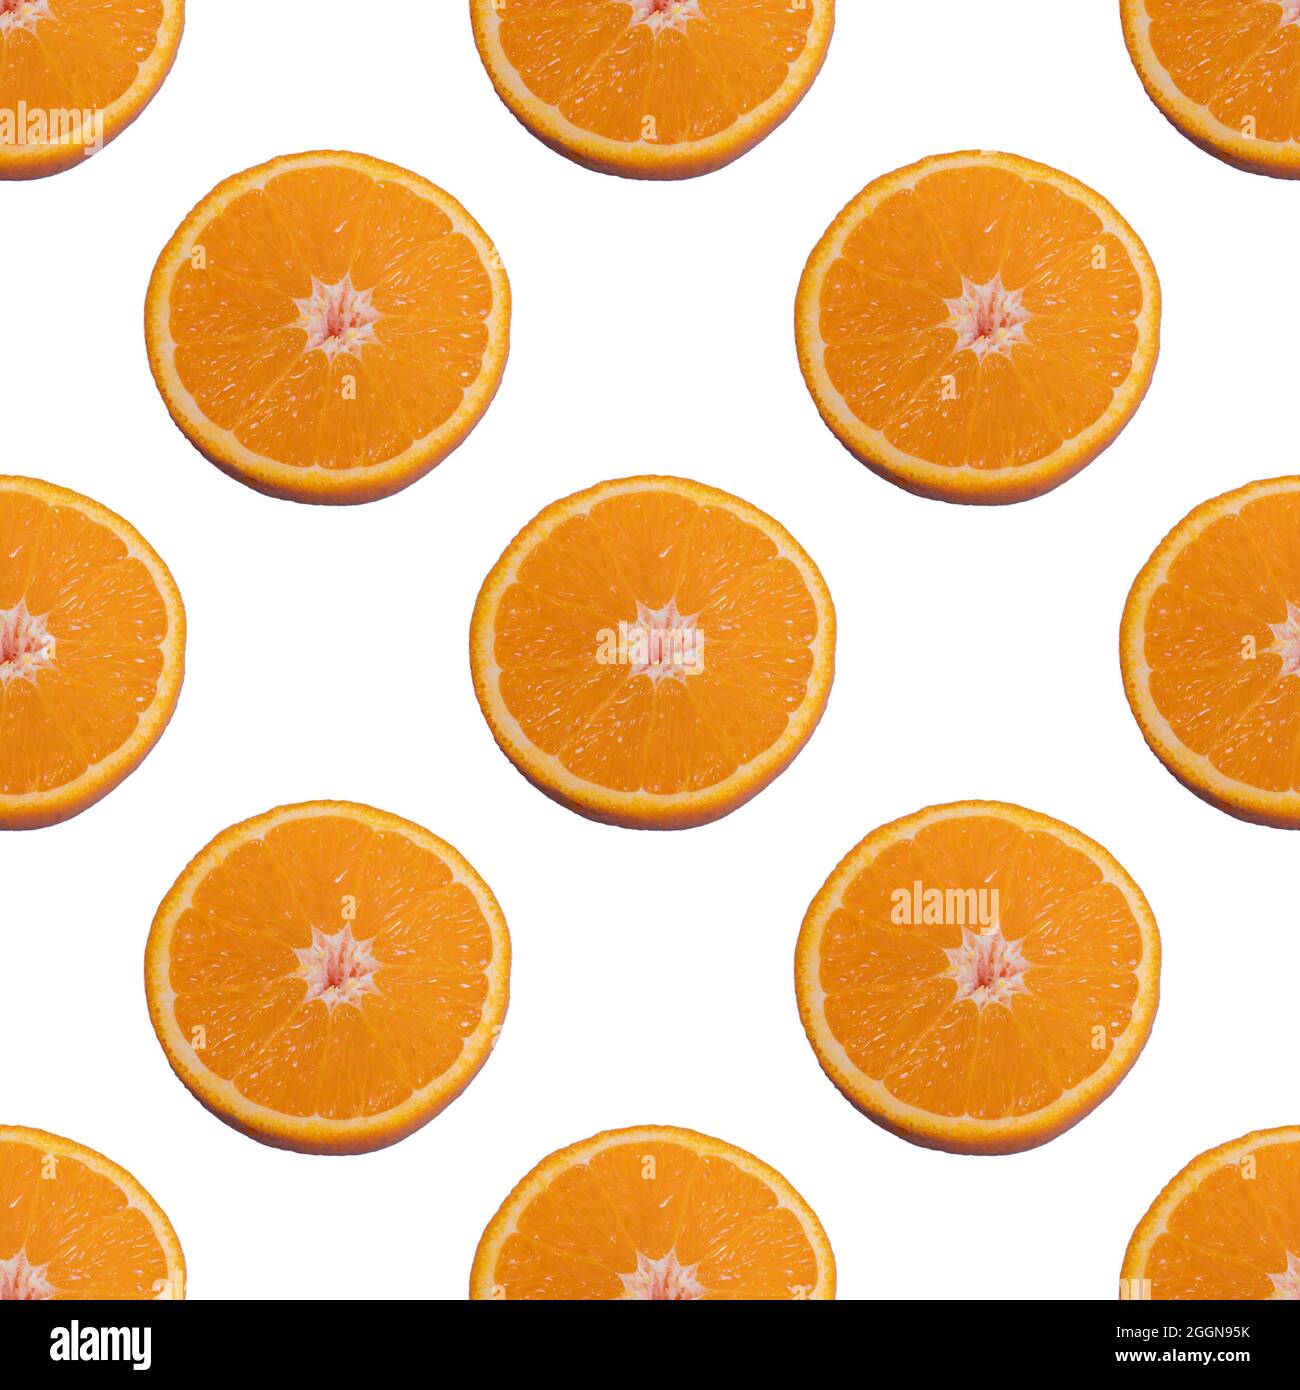 https://c8.alamy.com/comp/2GGN95K/seamless-pattern-from-half-an-orange-isolated-on-white-background-minimal-food-texture-fruit-background-2GGN95K.jpg